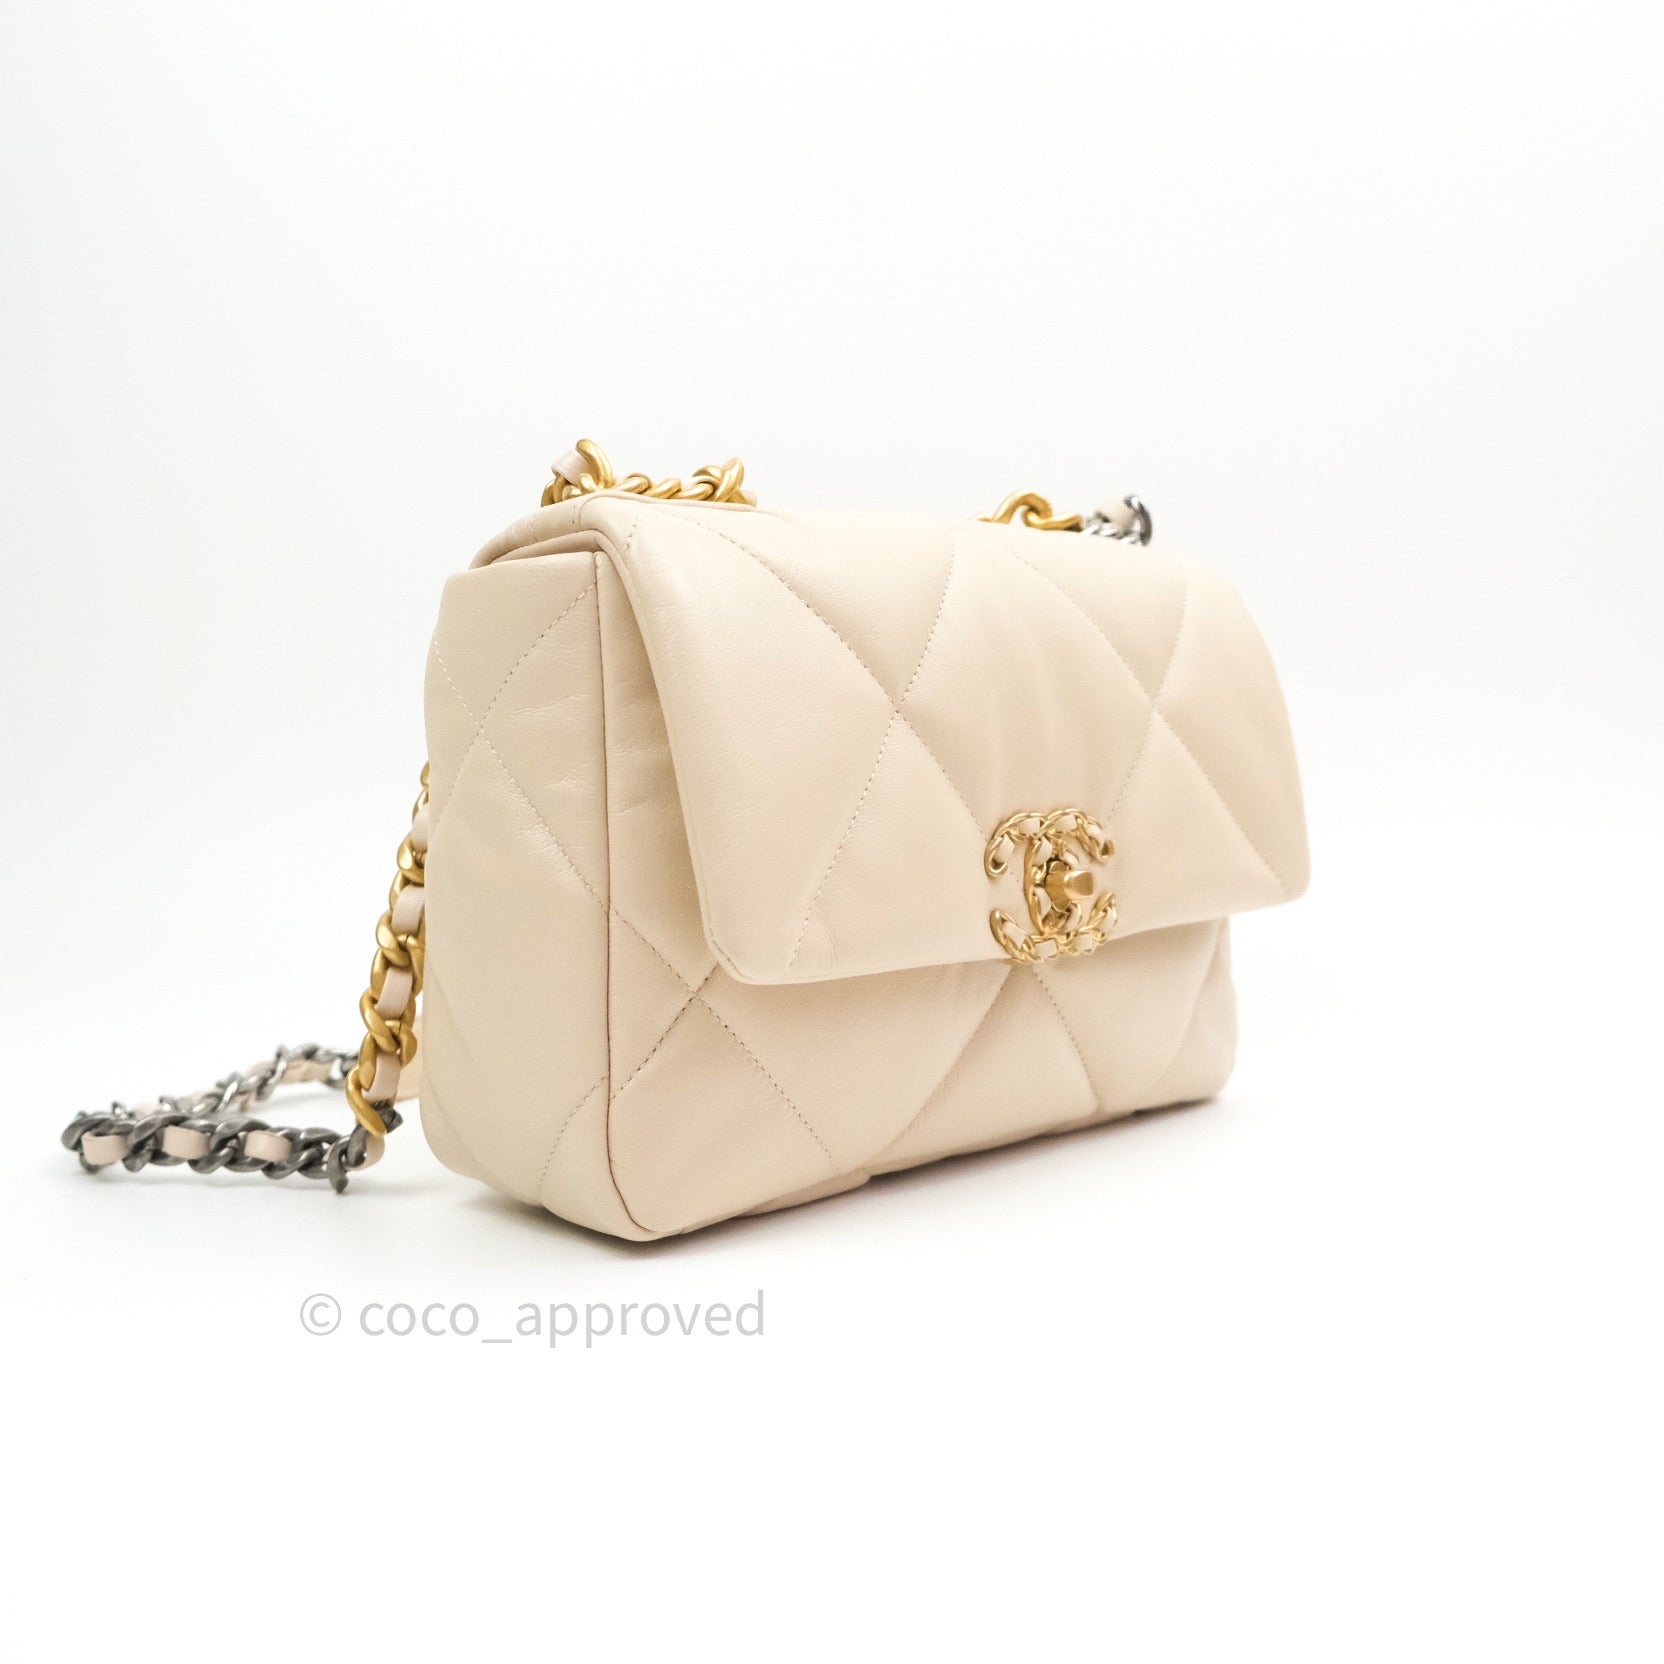 Chanel 19 leather handbag Chanel Beige in Leather - 29992325